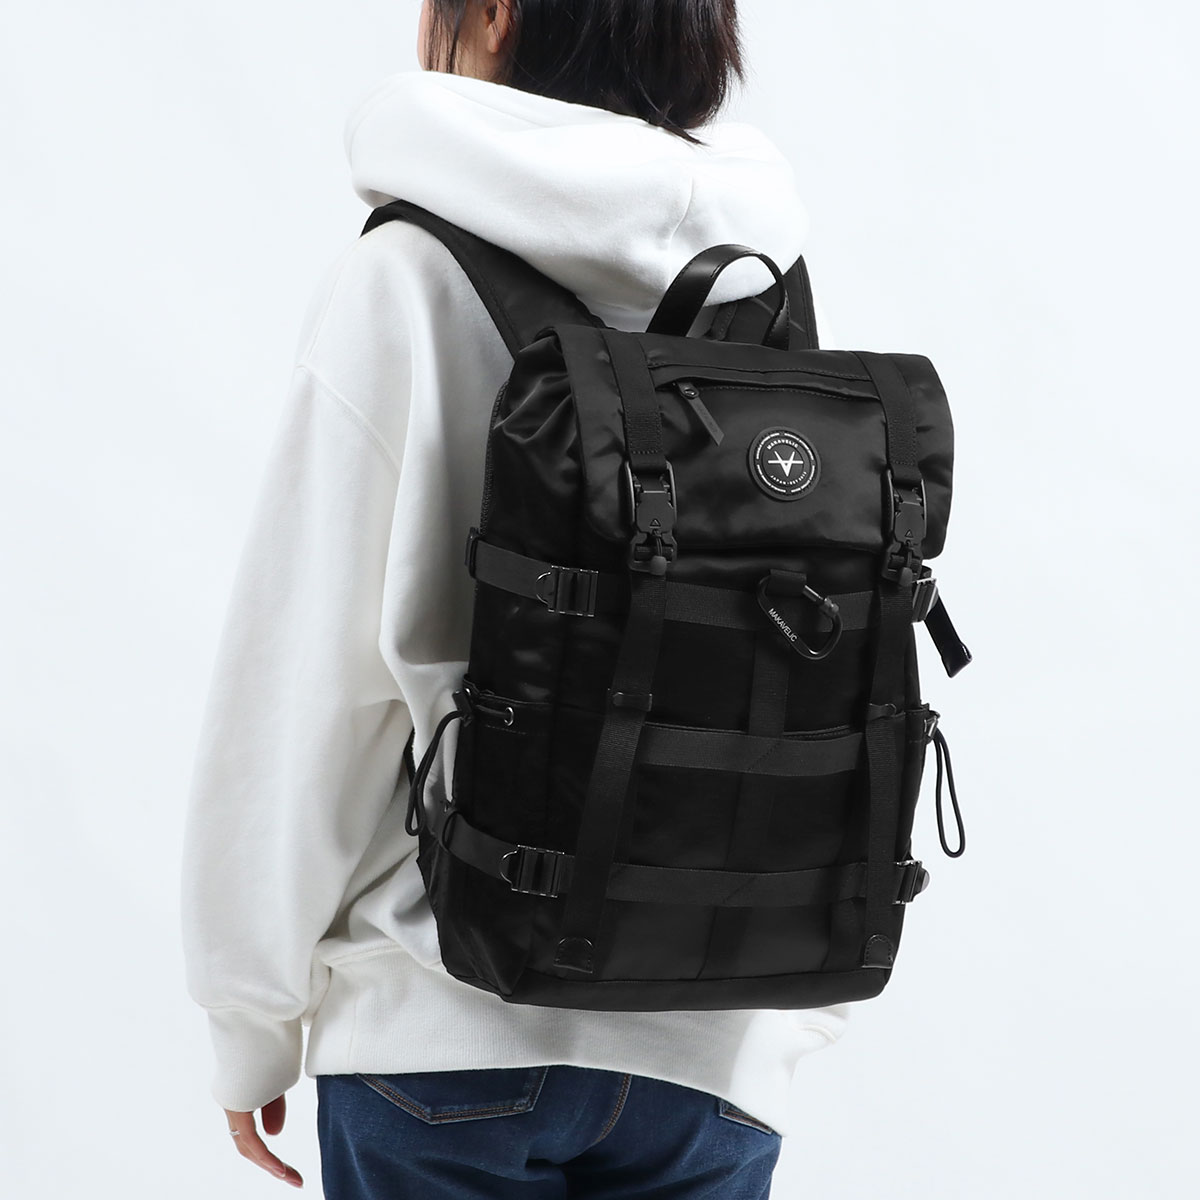 MAKAVELIC マキャベリック X-DESIGN LIMITED MESH WORK BACKPACK 3120